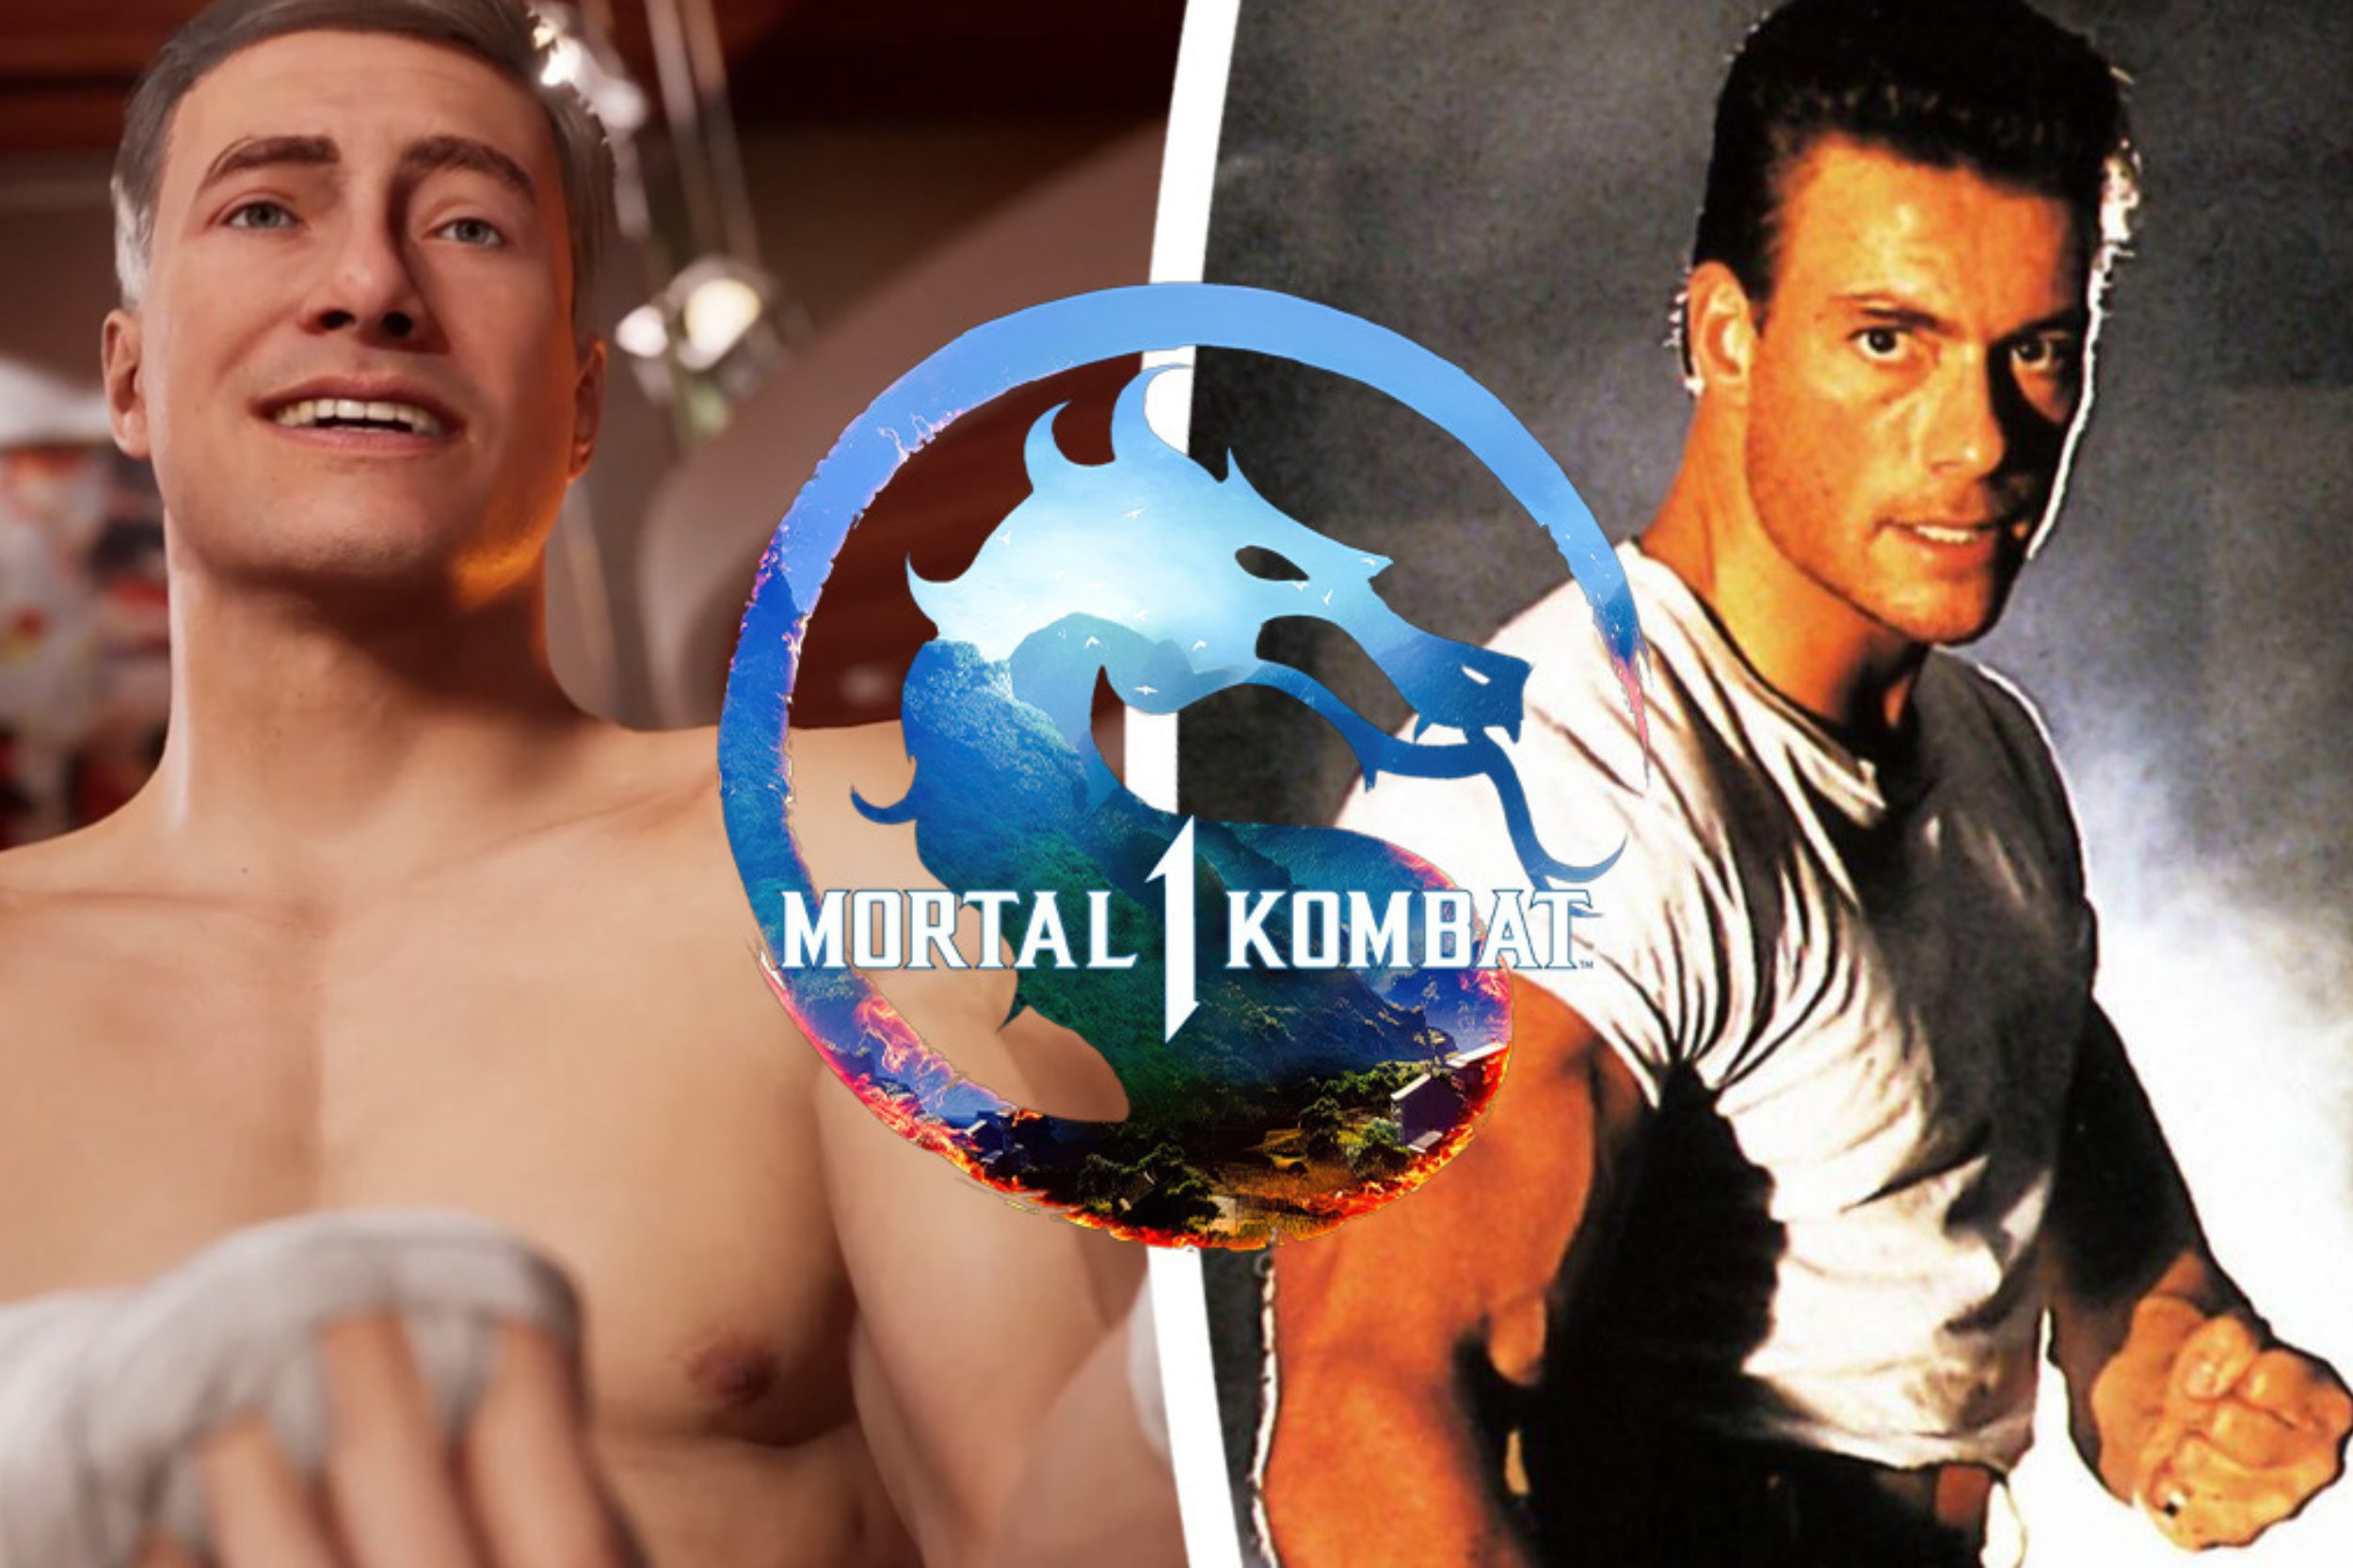 Jean-Claude Van Damme Officially Becomes A Mortal Kombatant. Photo by Mortal Kombat/YouTube Jean-Claude-Van-Dammes-‘Mortal-Kombat-1-Johnny-Cage-Skin-Revealed